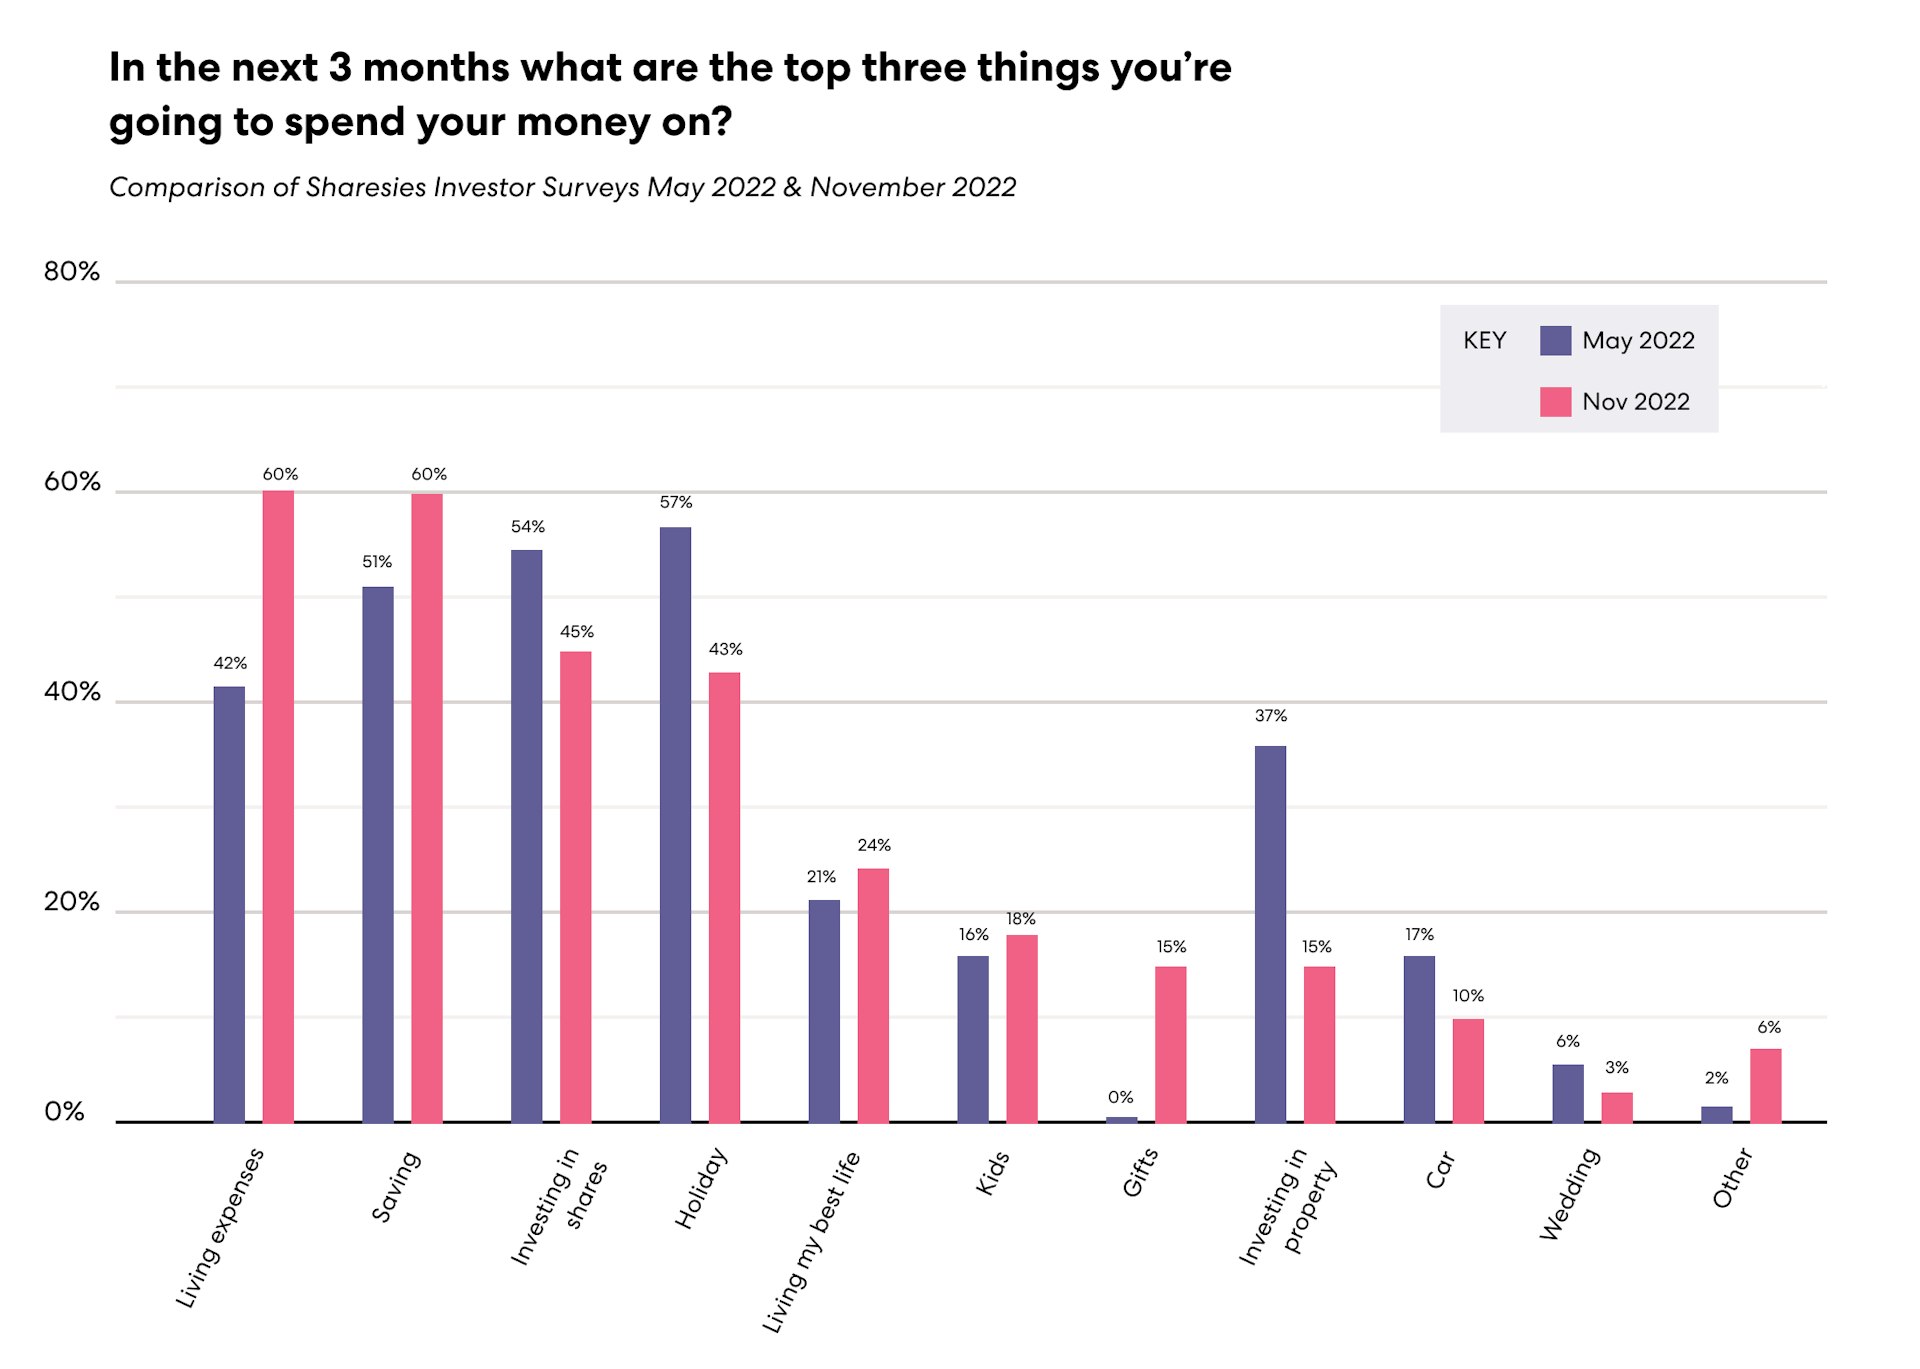 Bar graph showing the top three things that survey respondents will most likely spend their money on in the next three months.